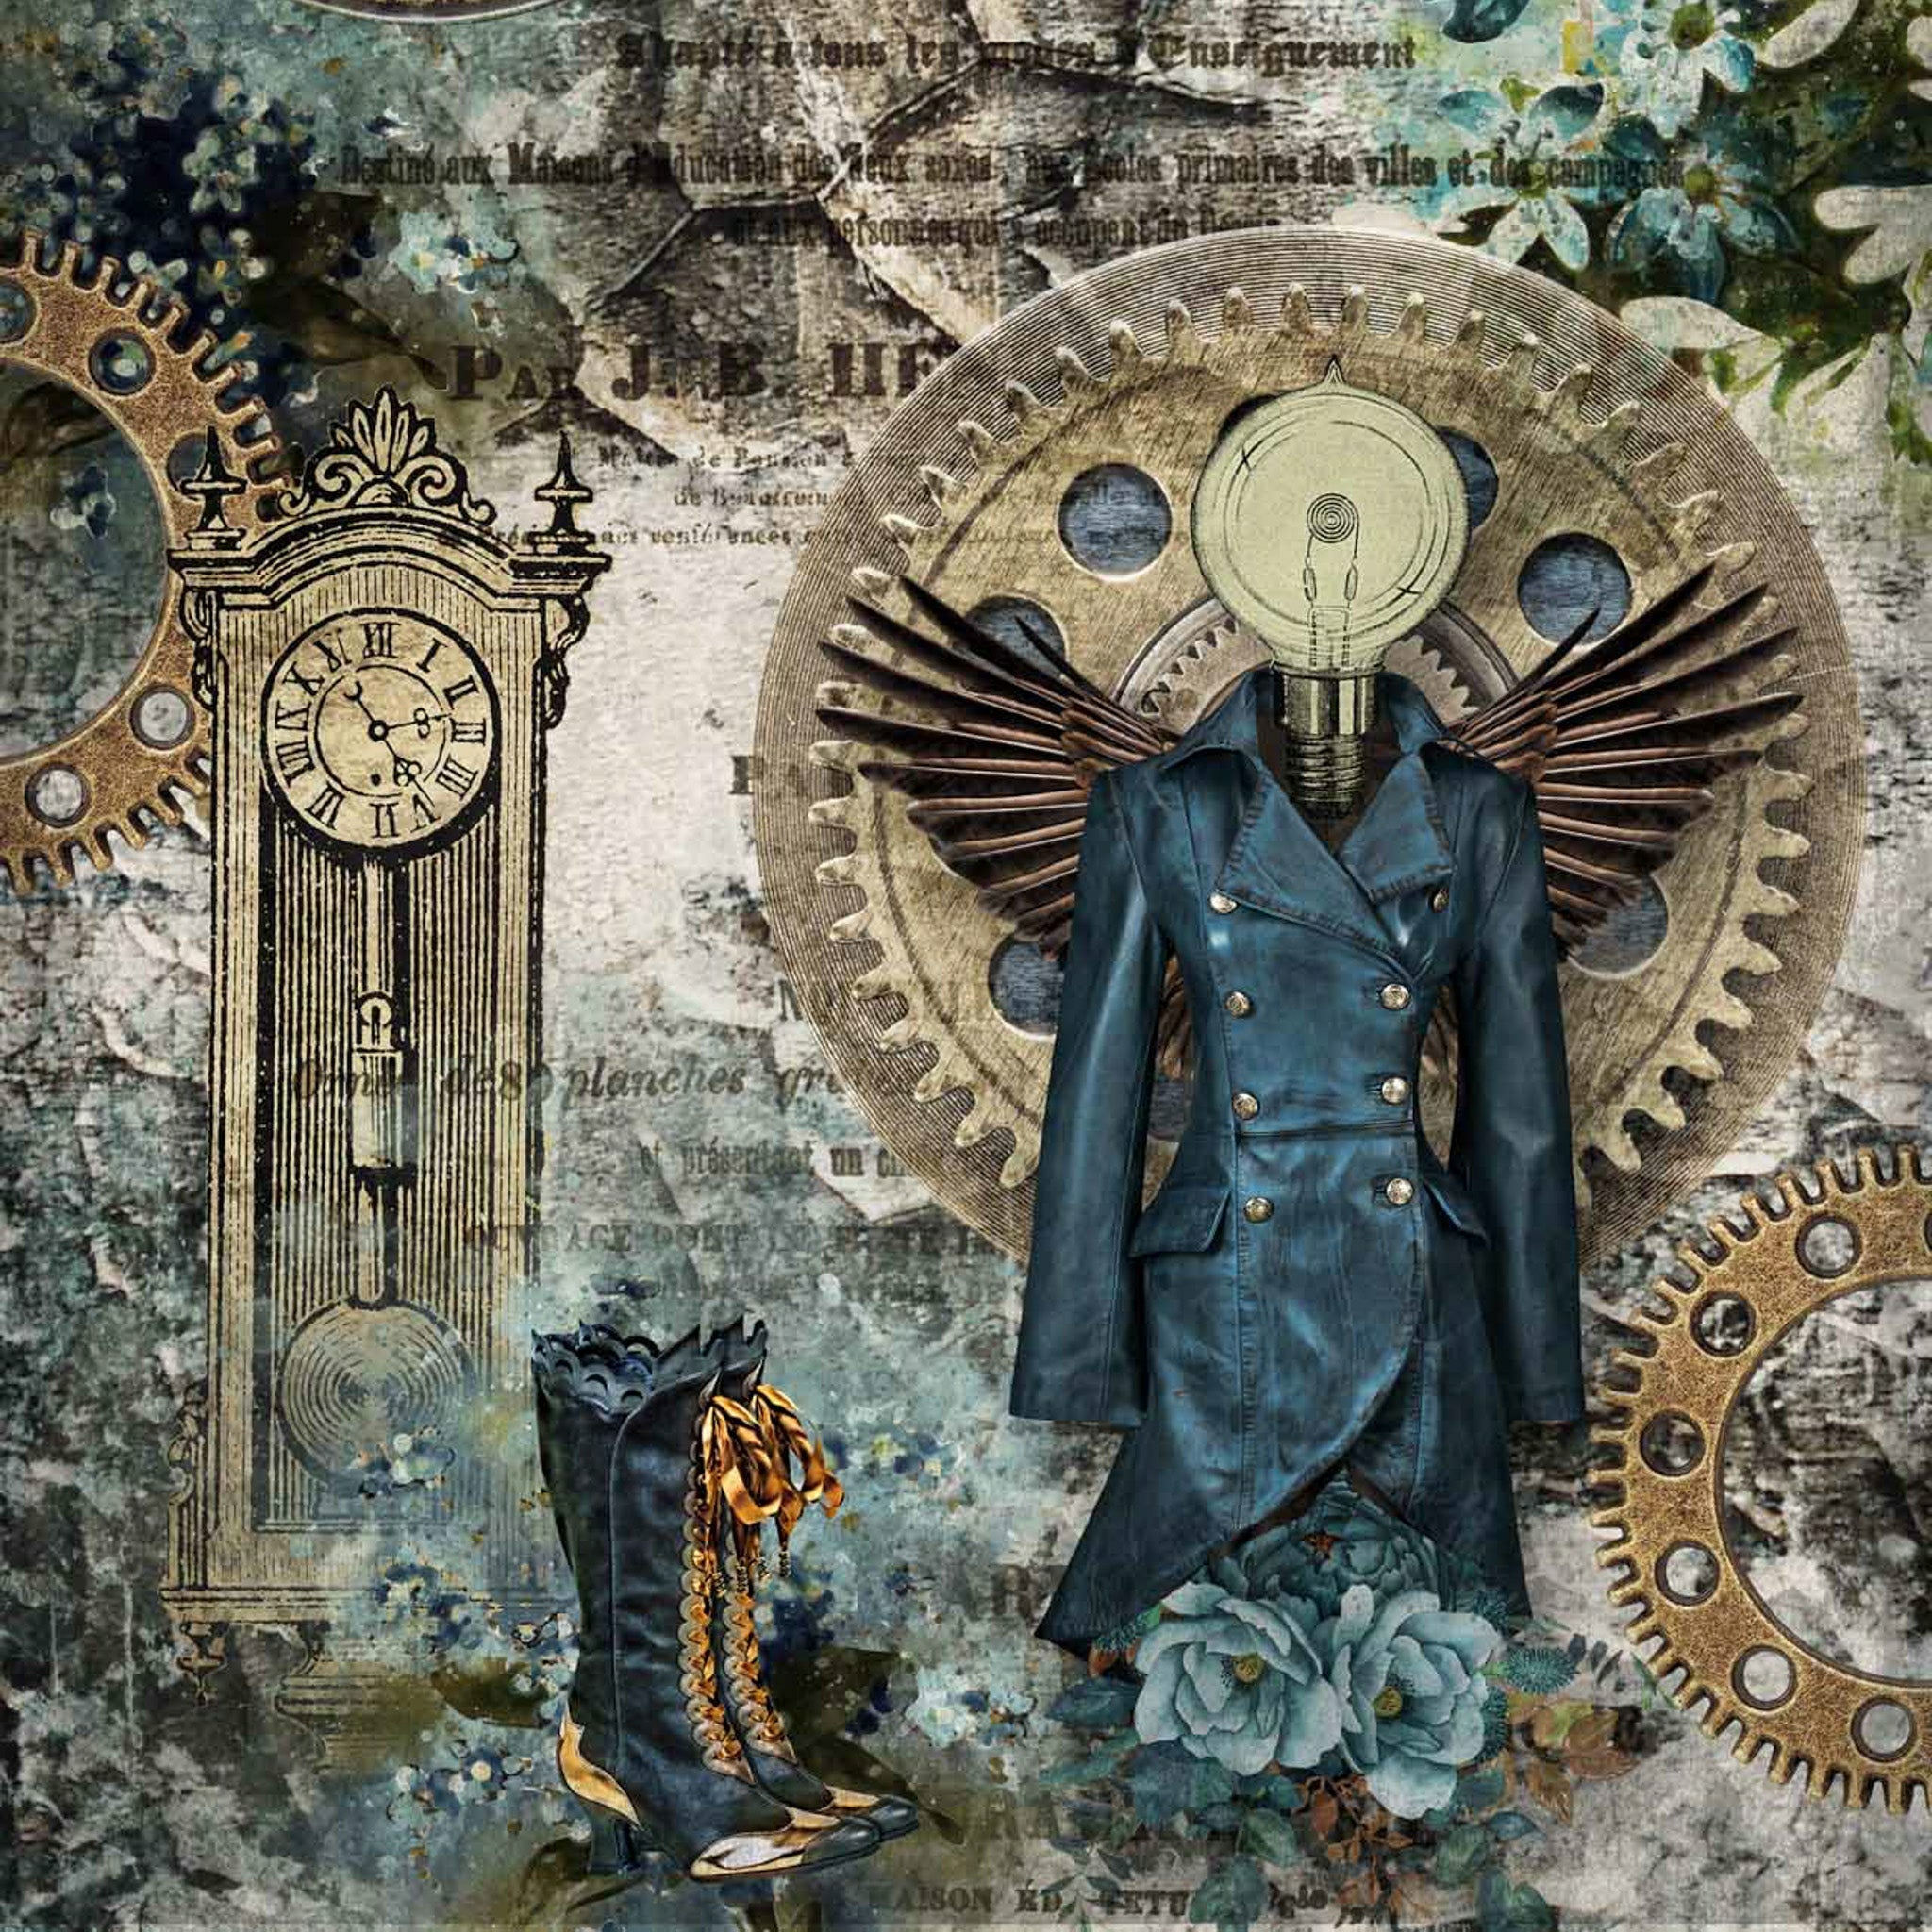 A2 rice paper that features a collage of Stemapunk Victorian boots and jacket with metal wings, clock gears, and a grandfather clock against a grungy vintge magazine parchment.